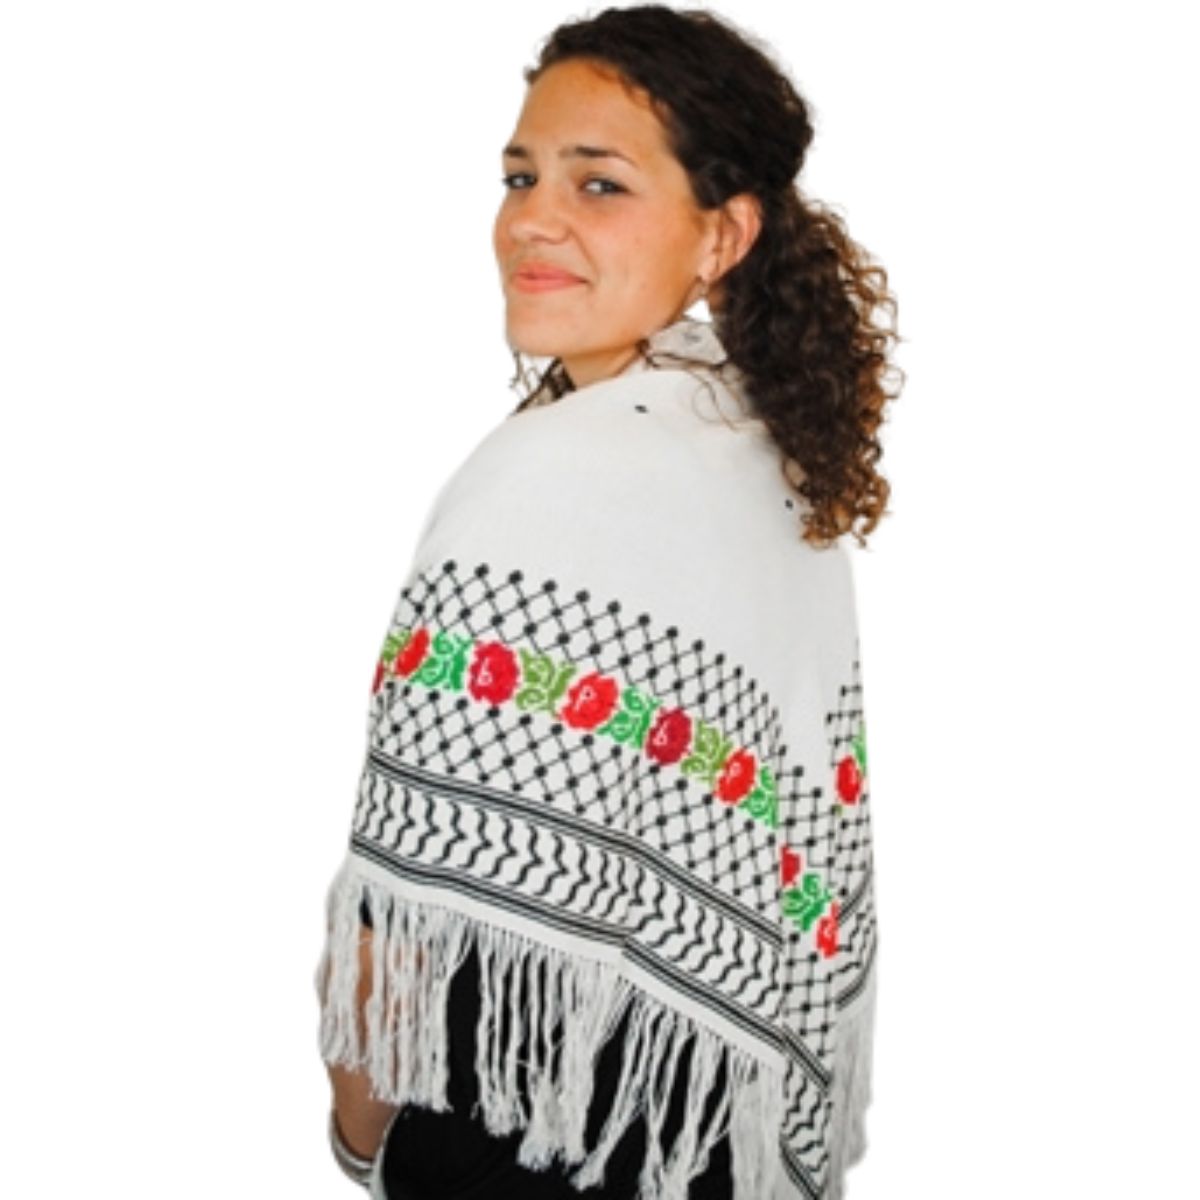 Embroidered Keffiyeh from Gaza